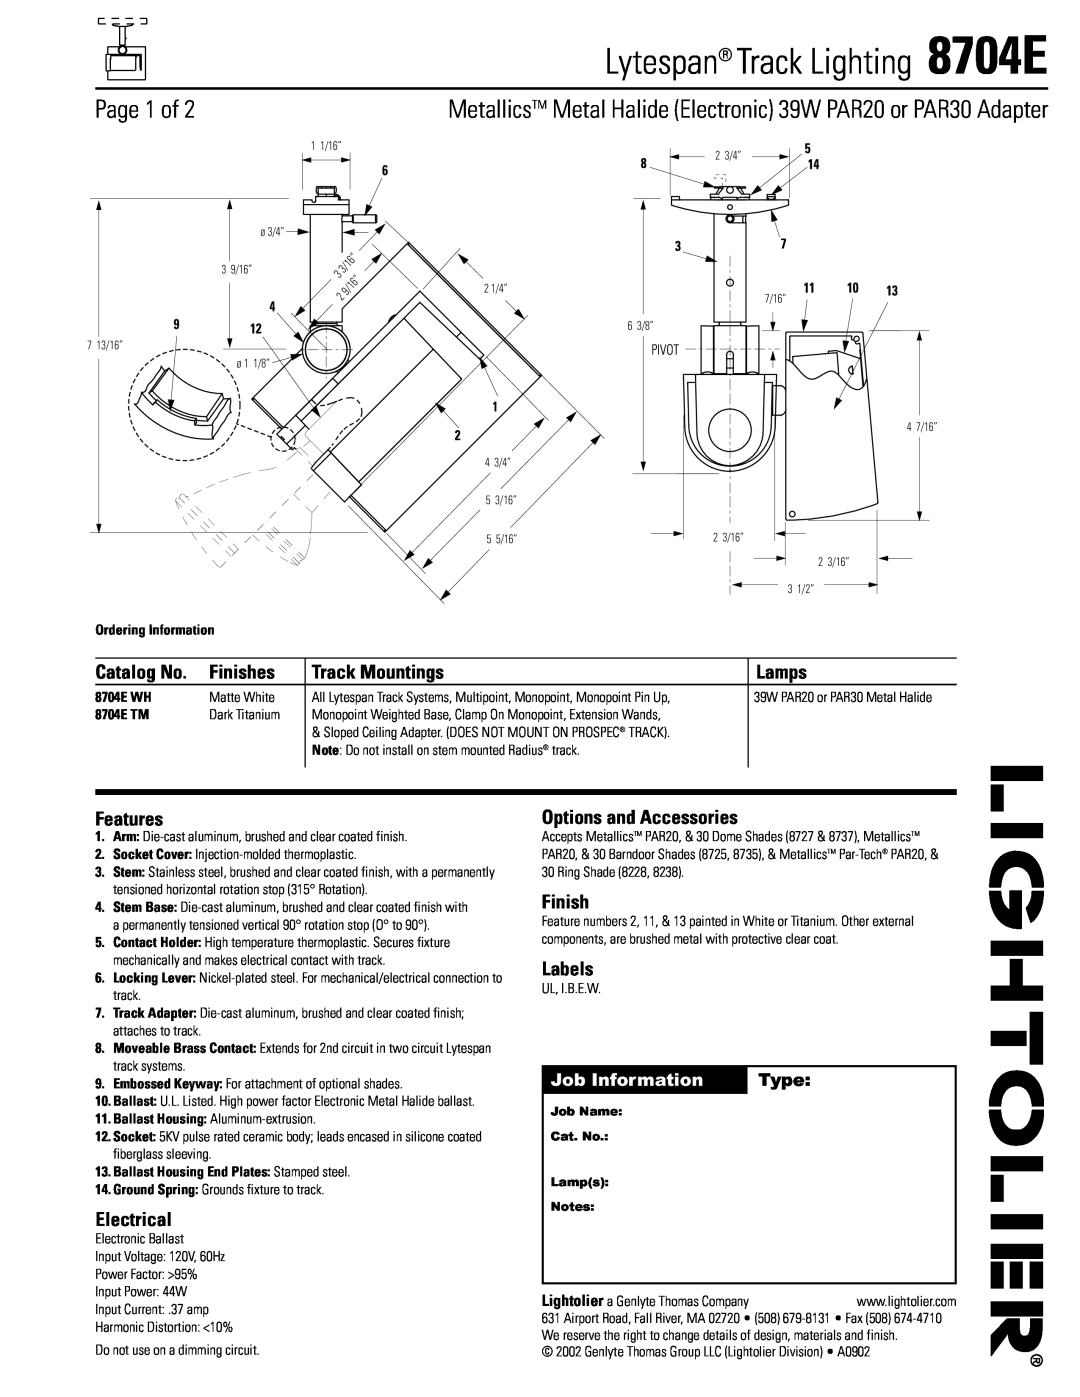 Lightolier 8704E manual Catalog No, Finishes, Track Mountings, Lamps, Features, Electrical, Options and Accessories, Type 